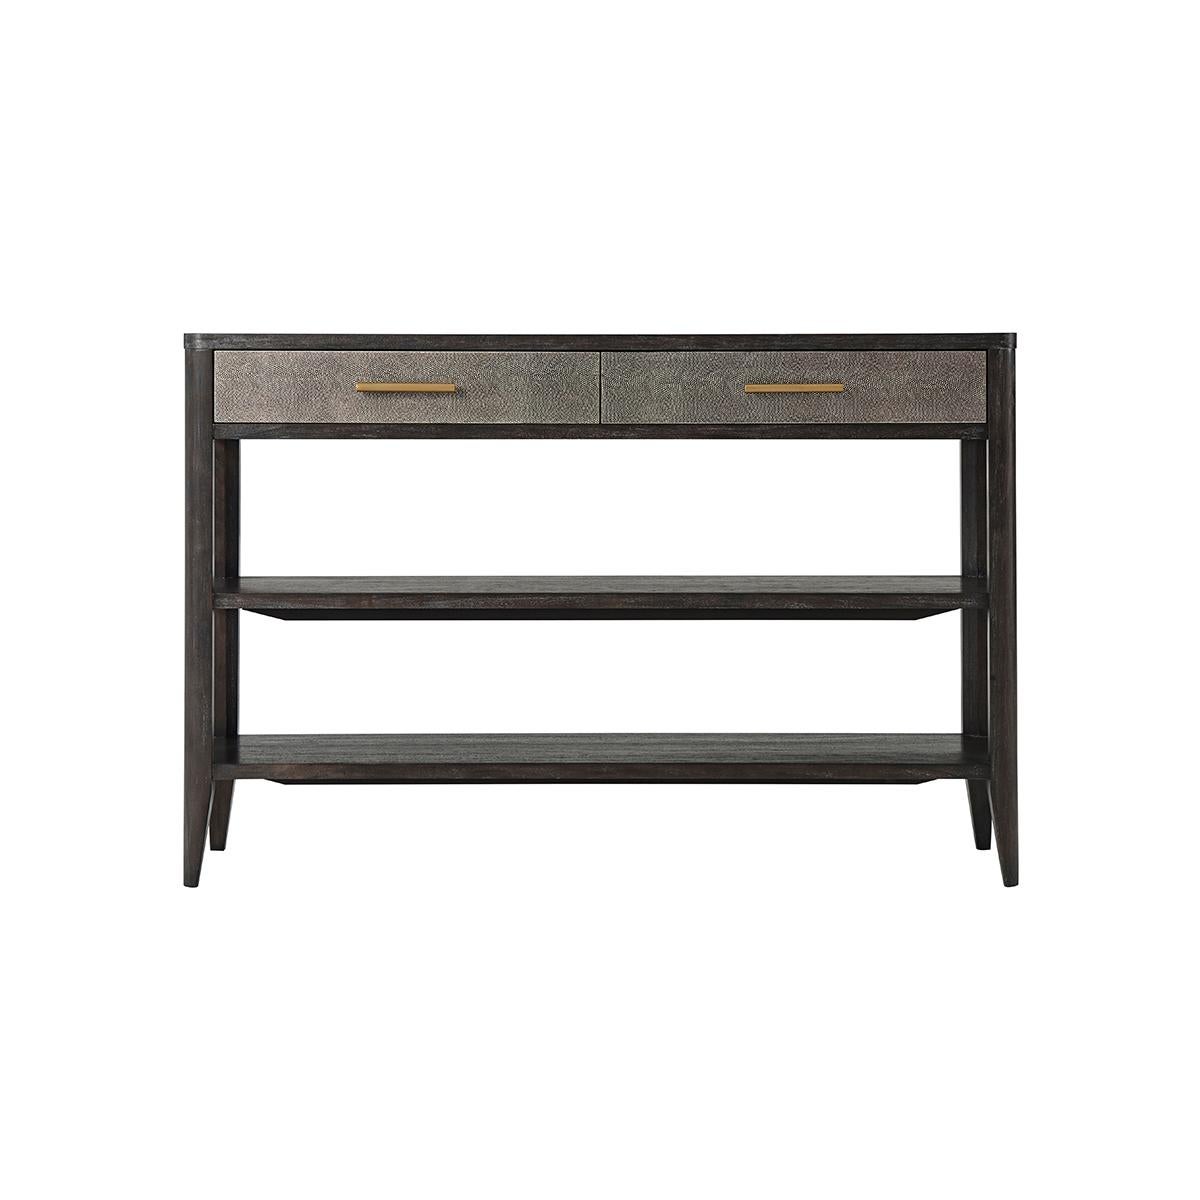 In a dark finish with two Komodo embossed leather panel frieze drawers. The two soft closing drawers with above two lower tier shelves.

Dimensions: 55